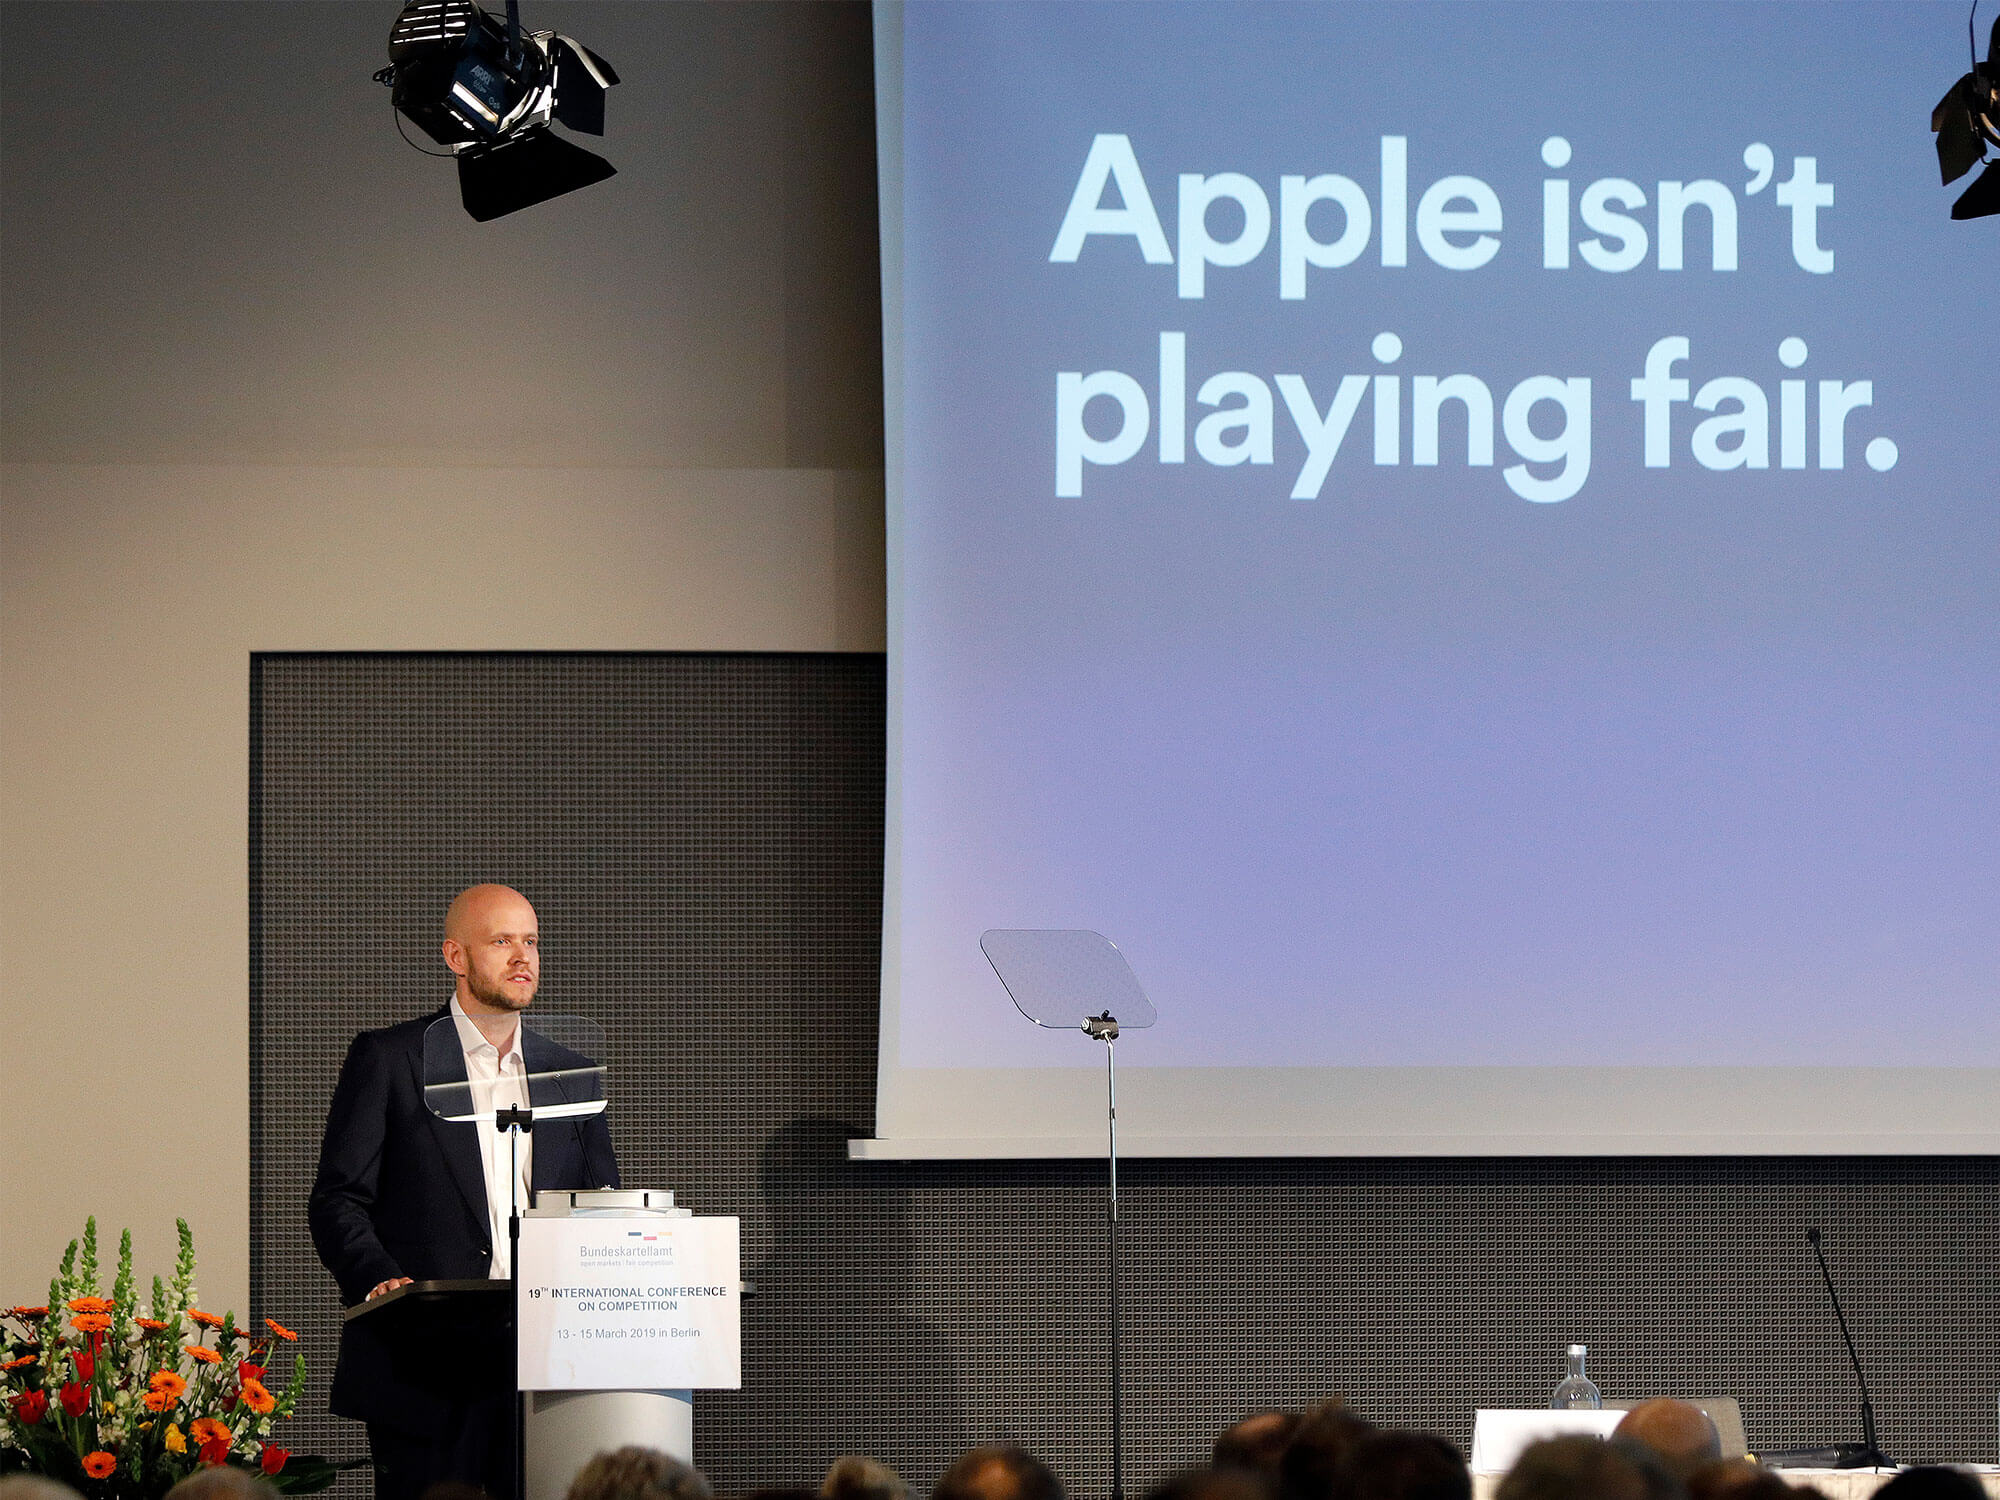 Spotify founder Daniel Ek speaks at the 19th International Conference on Competition at Steigenberger Hotel am Kanzleramt on March 14, 2019 in Berlin, Germany. Ek discussed how fair competition enables consumers and innovators to win. (Photo by Sebastian Reuter/Getty Images for Spotify)